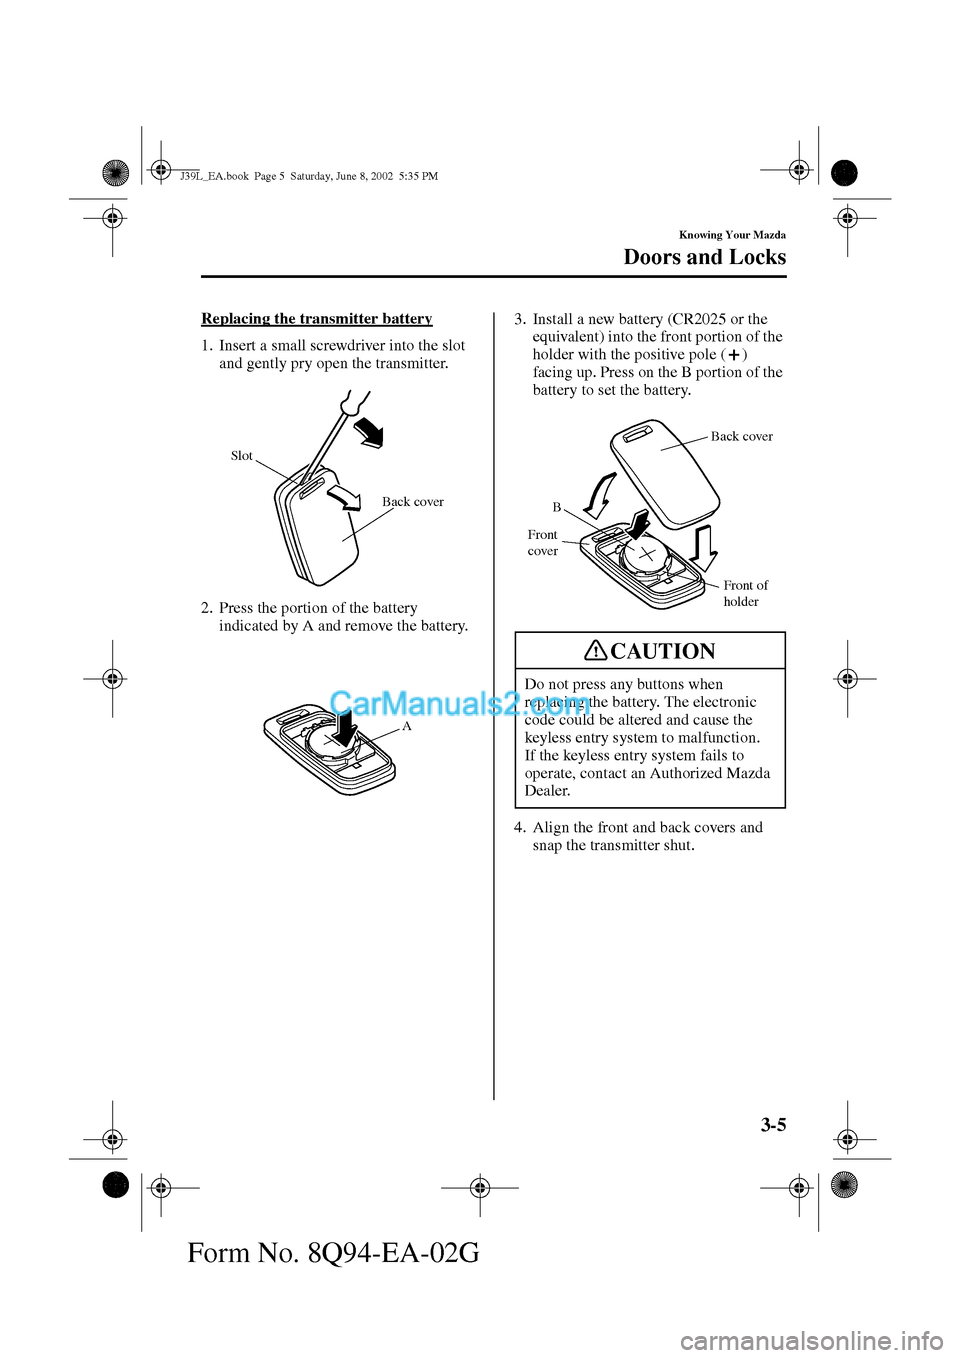 MAZDA MODEL PROTÉGÉ 2003  Owners Manual (in English) 3-5
Knowing Your Mazda
Doors and Locks
Form No. 8Q94-EA-02G
Replacing the transmitter battery
1. Insert a small screwdriver into the slot 
and gently pry open the transmitter.
2. Press the portion of 